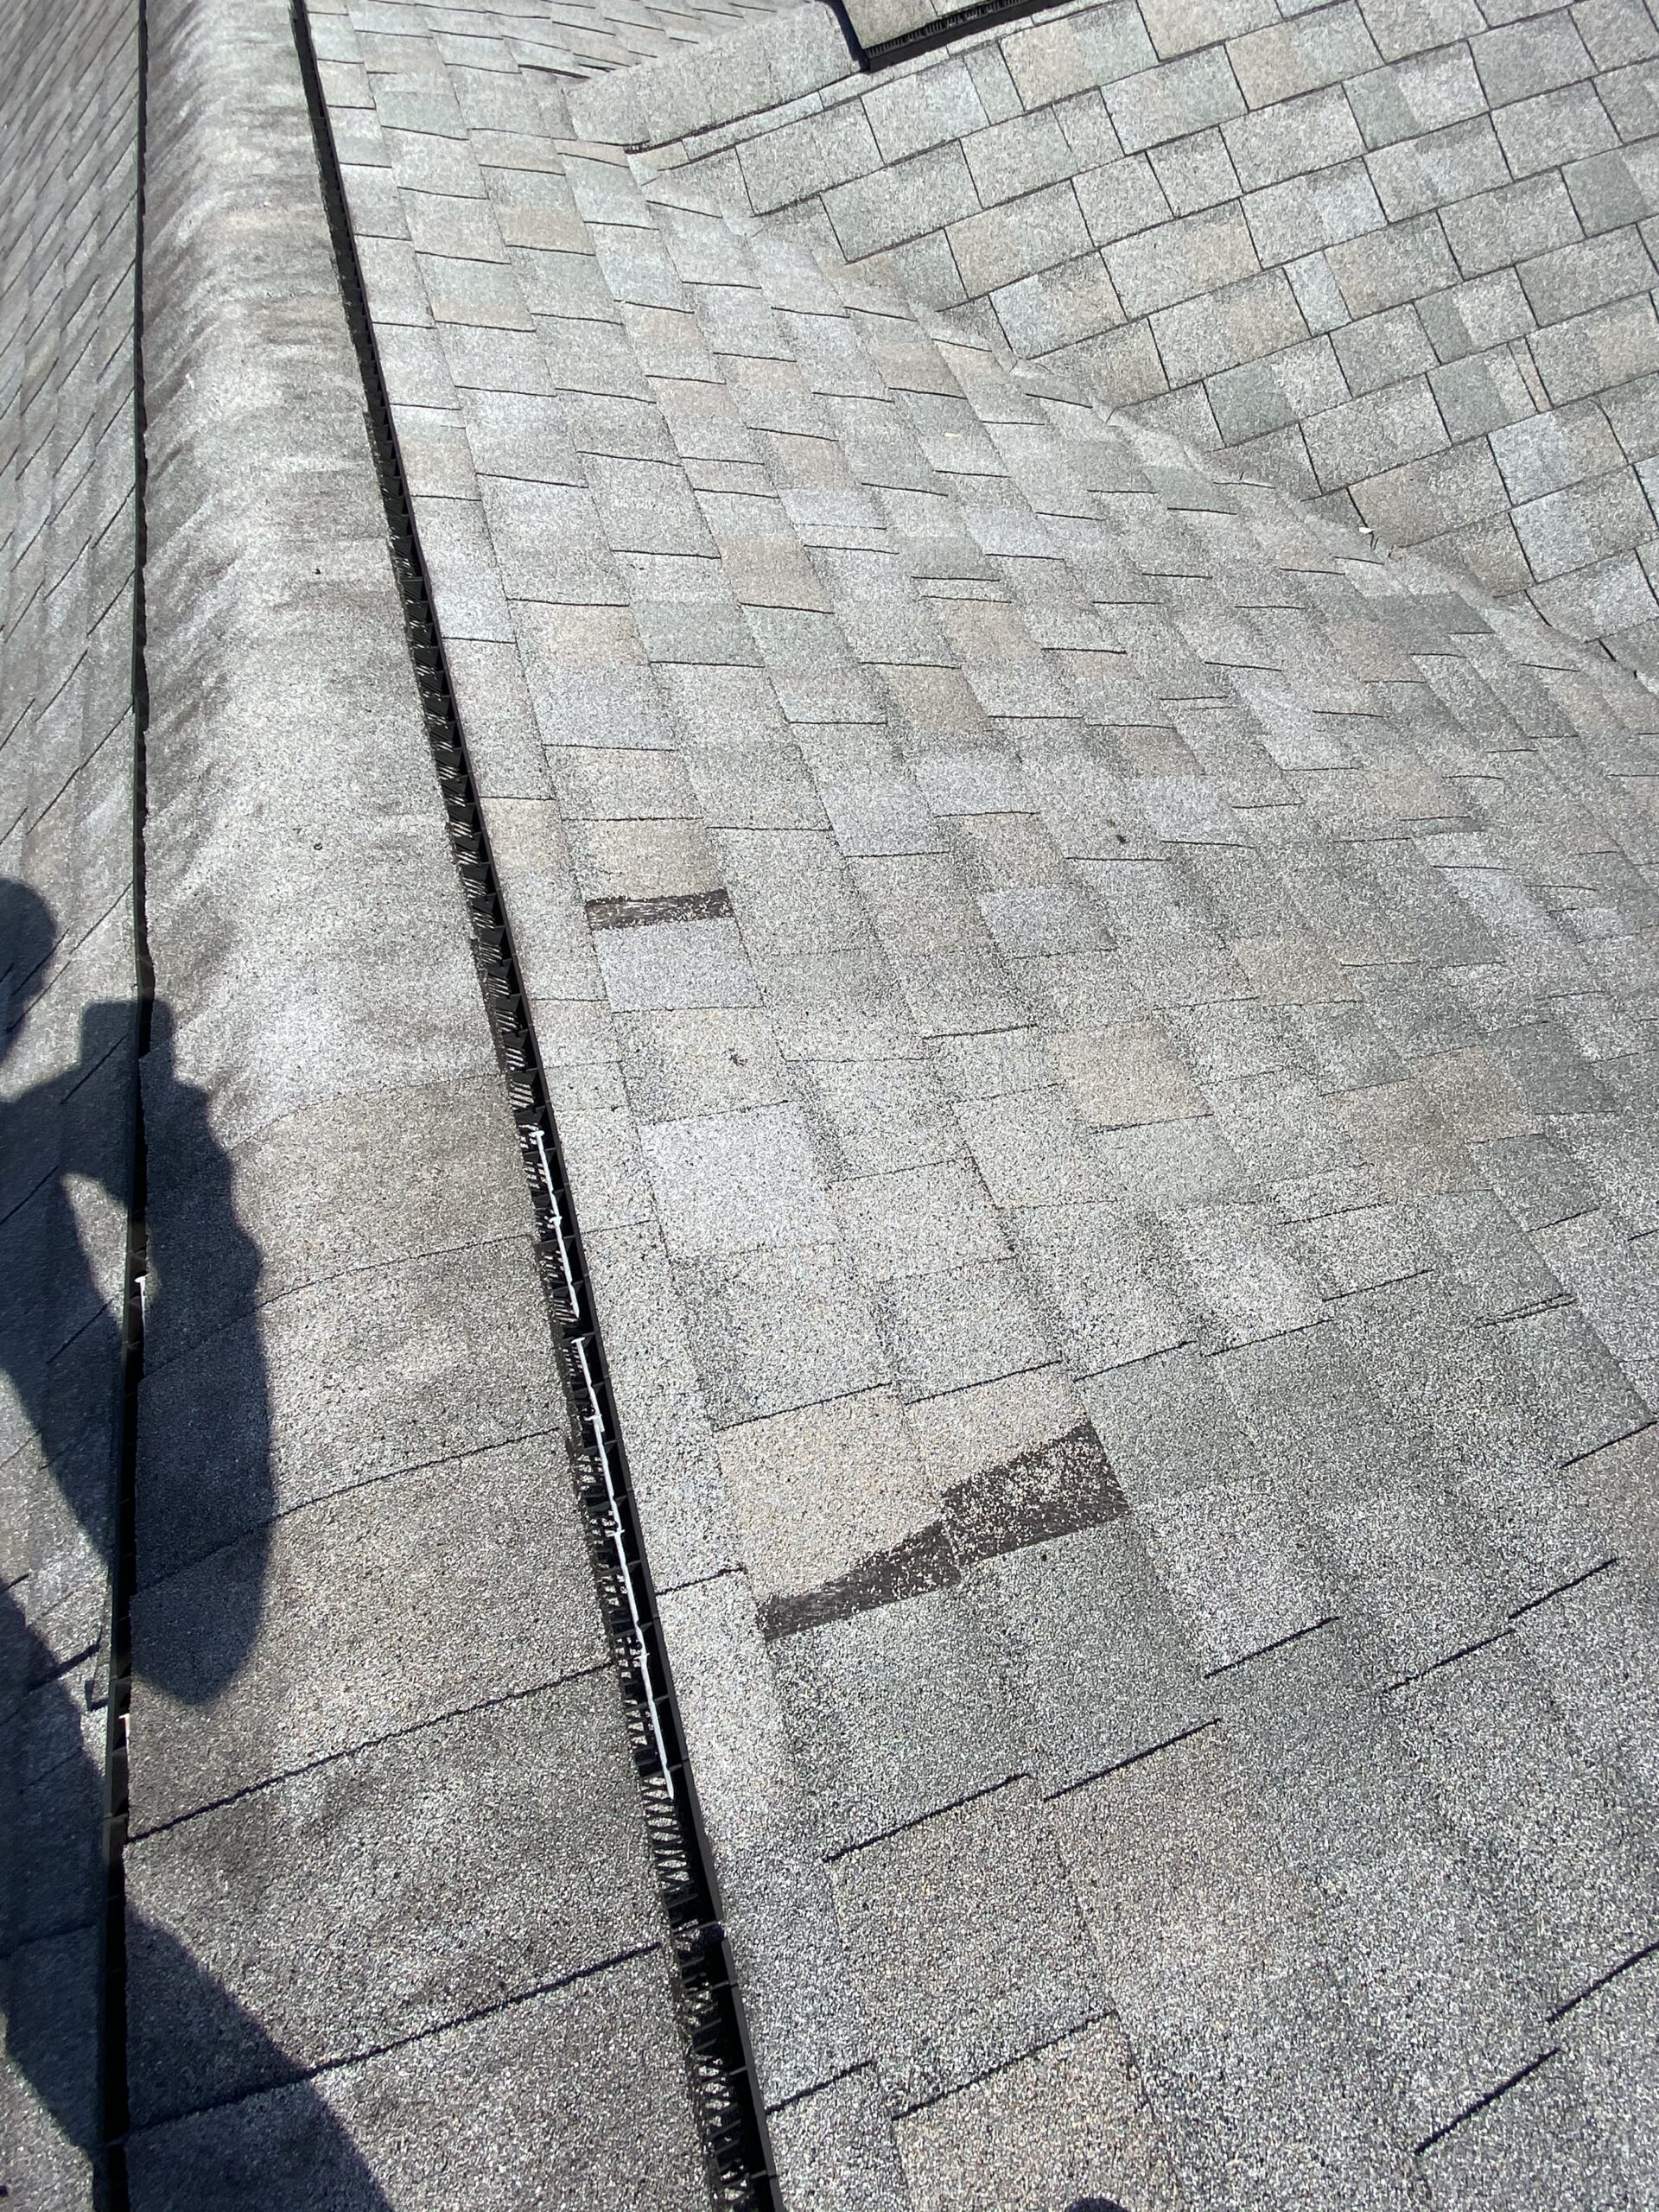 This is a picture of an old gray roof with missing shingles